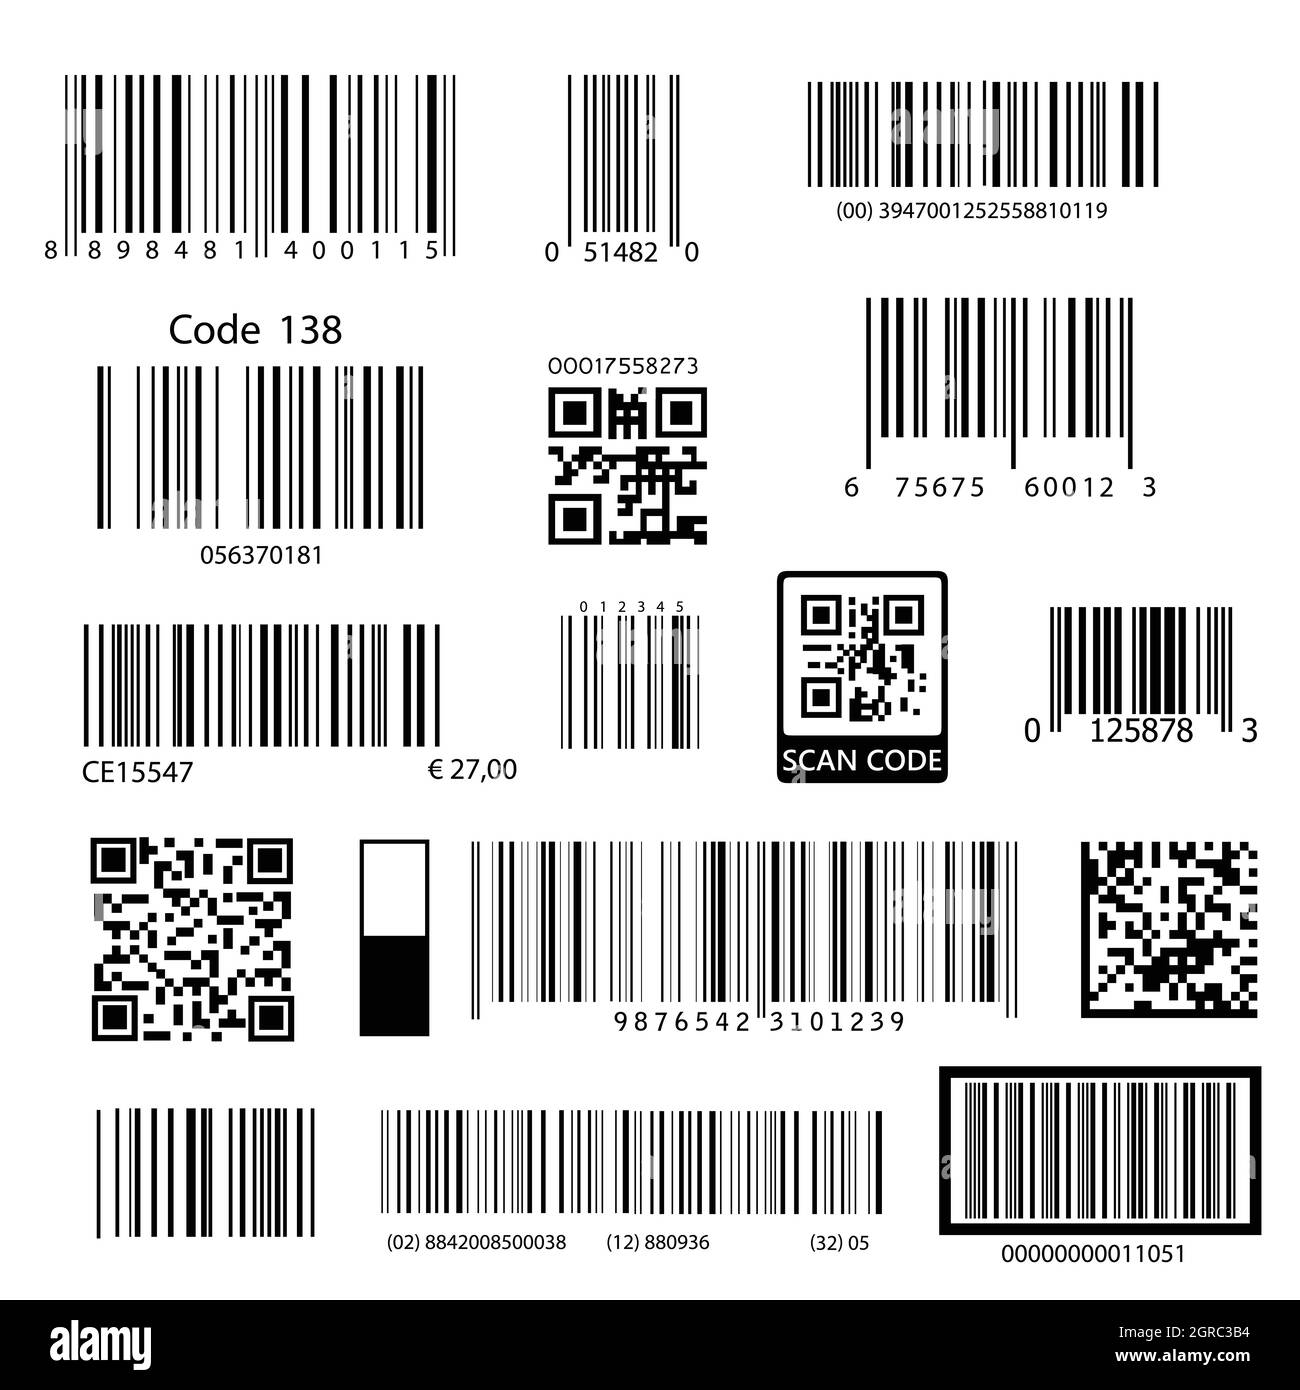 Price Tag Template - Free Pricing label Templates for barcode